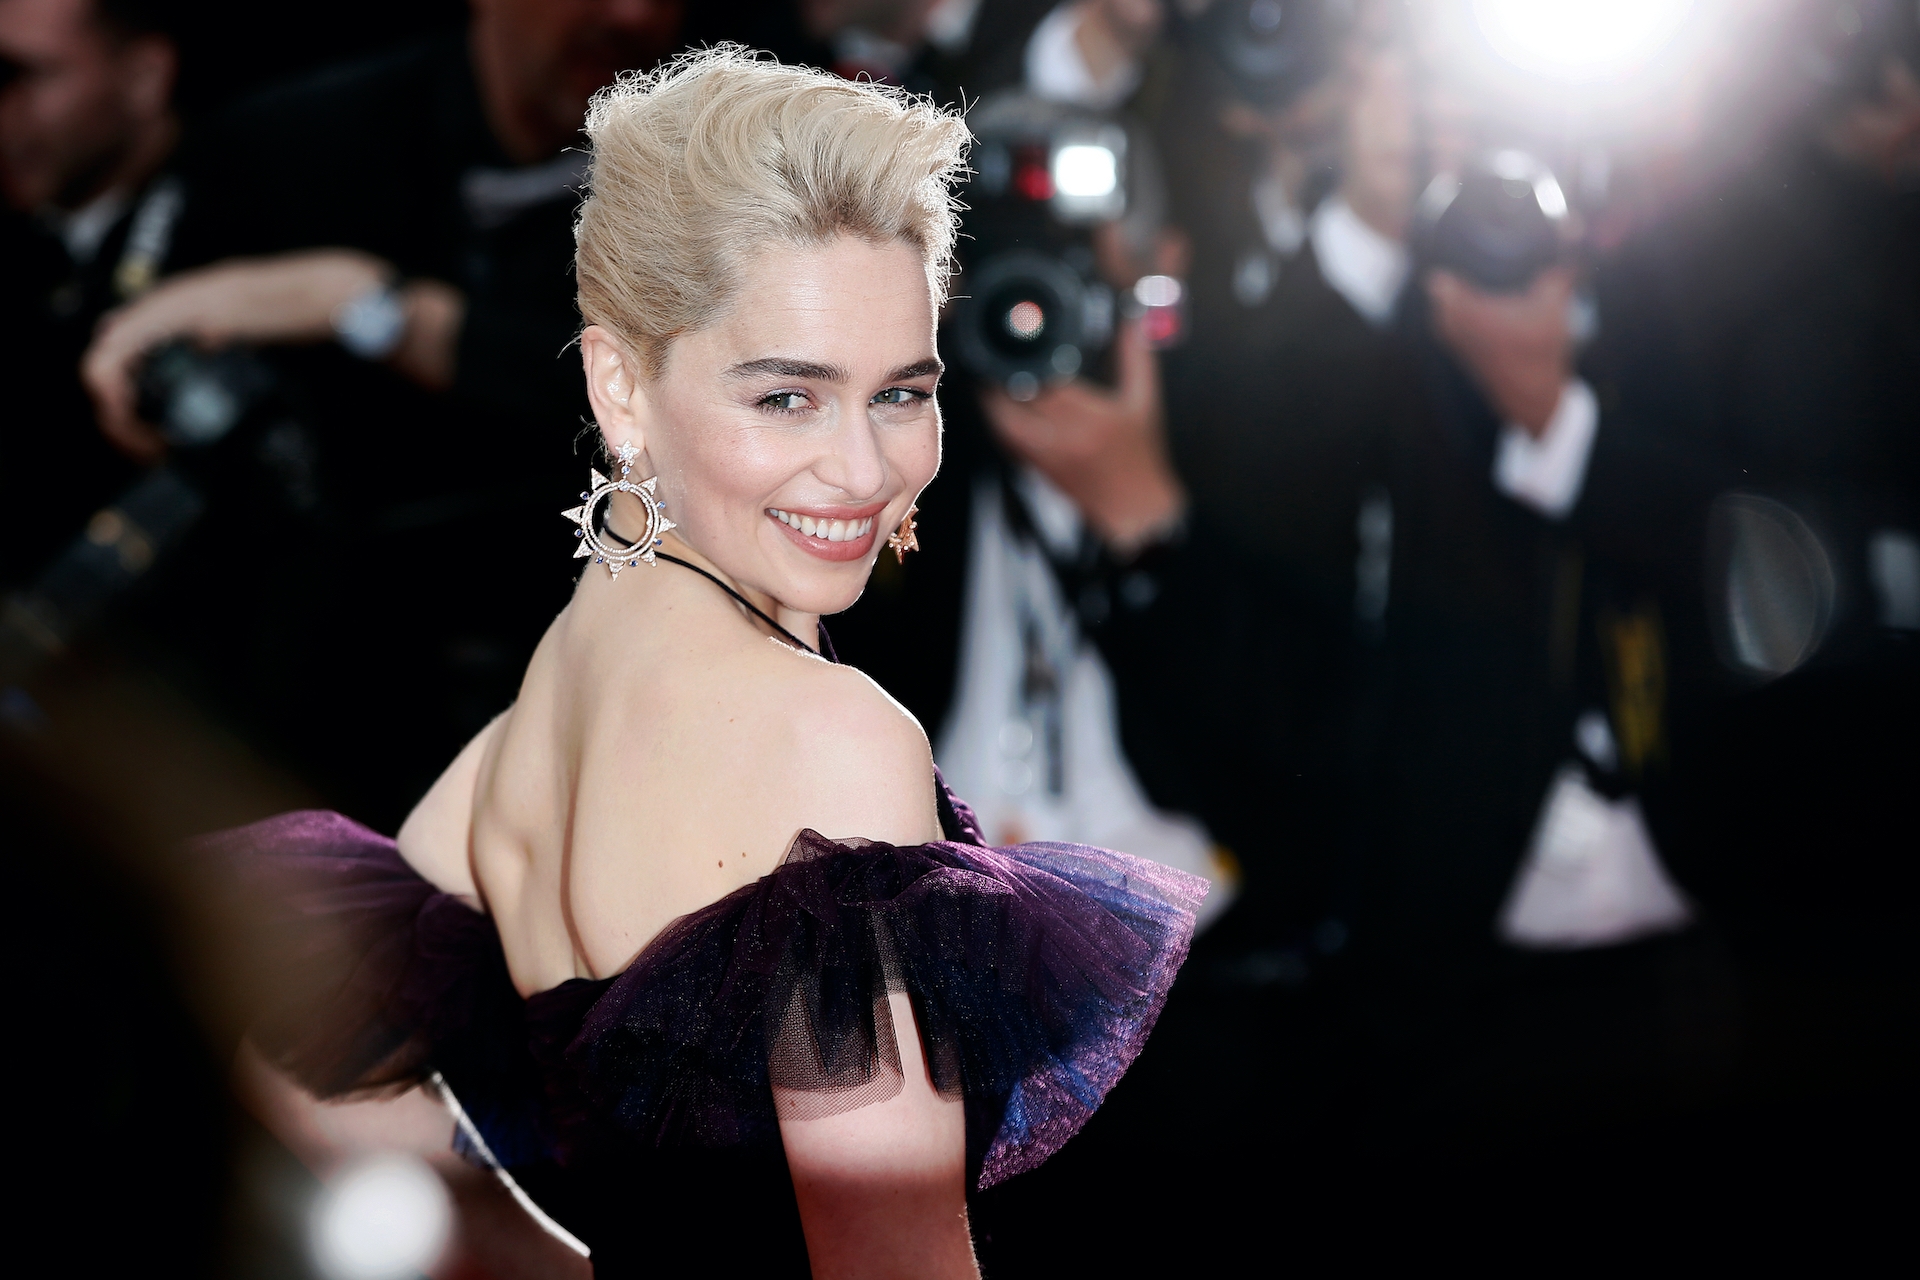 Emilia Clarke previously revealed that in 2011 and 2013, she survived two brain aneurysms. Recently, she opened up that she had to excruciate portions of her brain to recover from aphasia; the consequences of the trauma her brain had gone through.